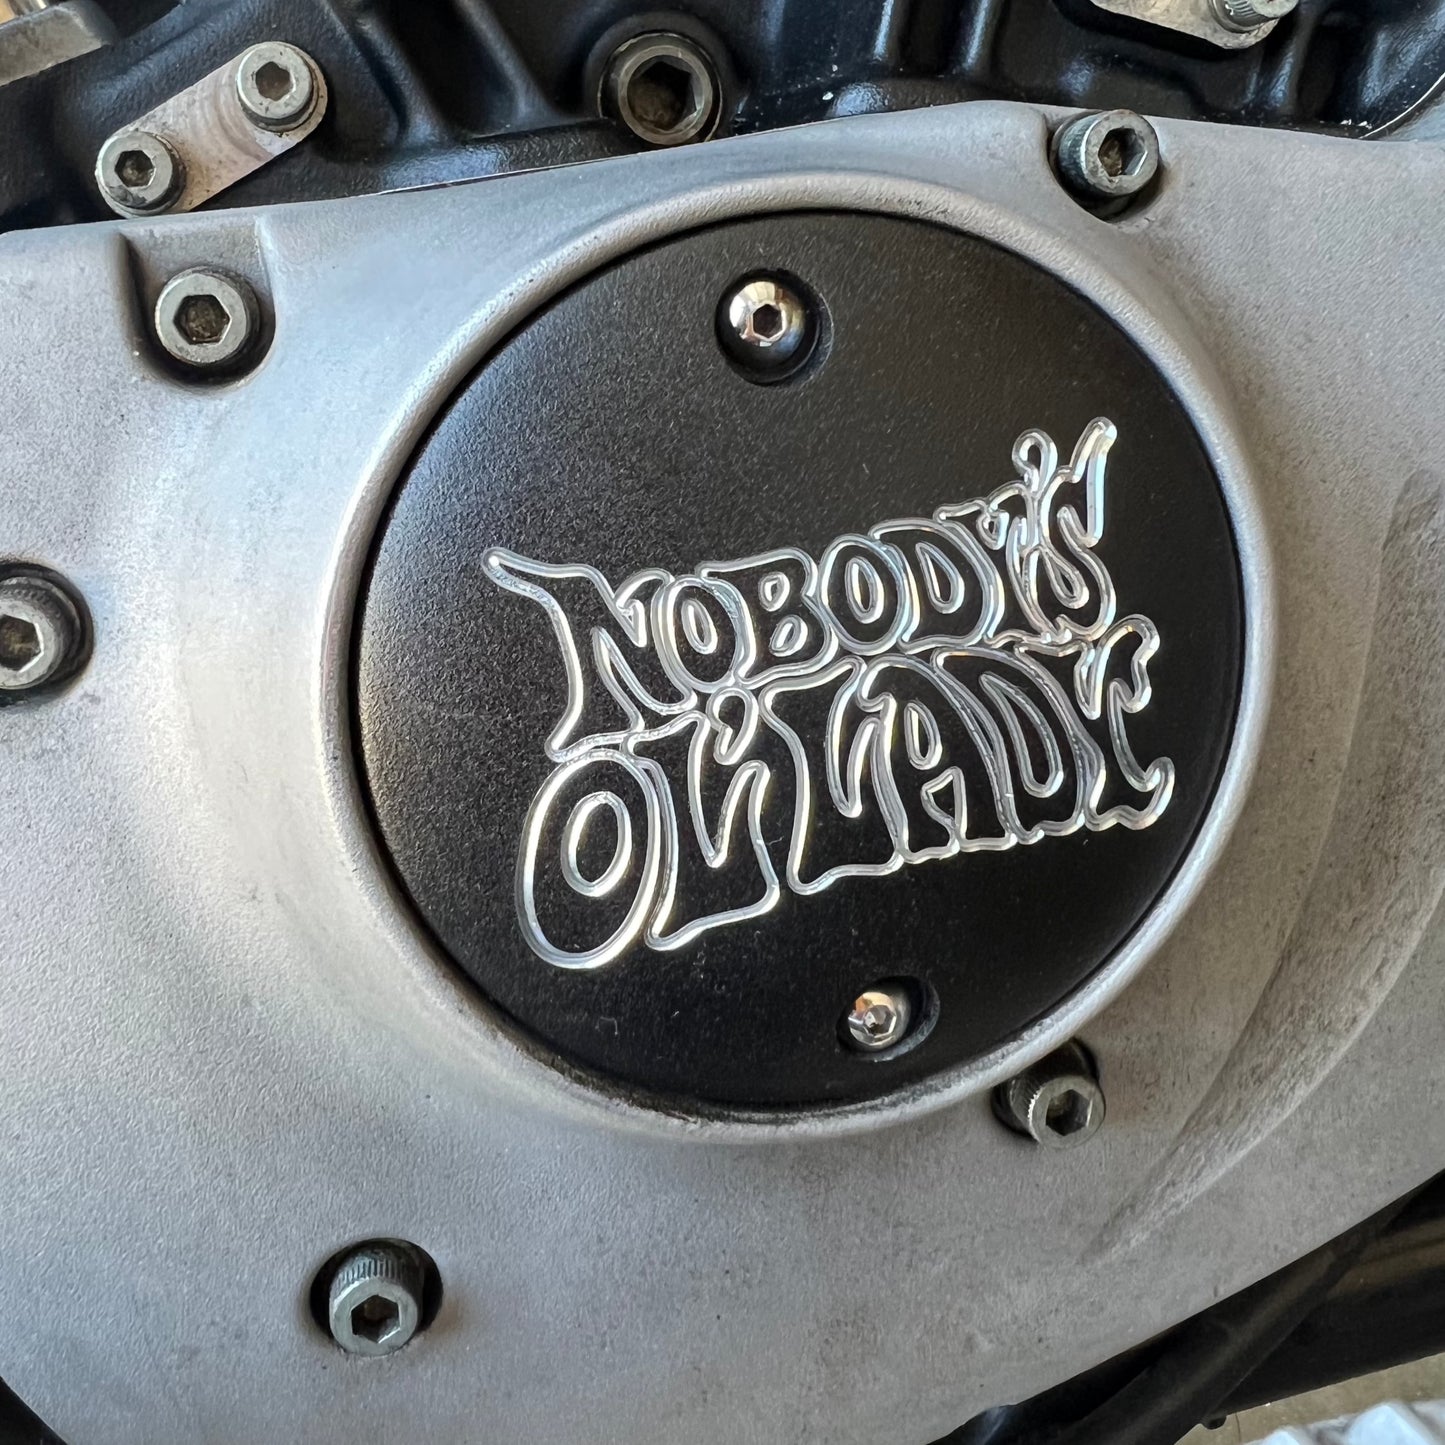 Axel Co  "Nobody's Ol' Lady"  Motorcycle Points Cover